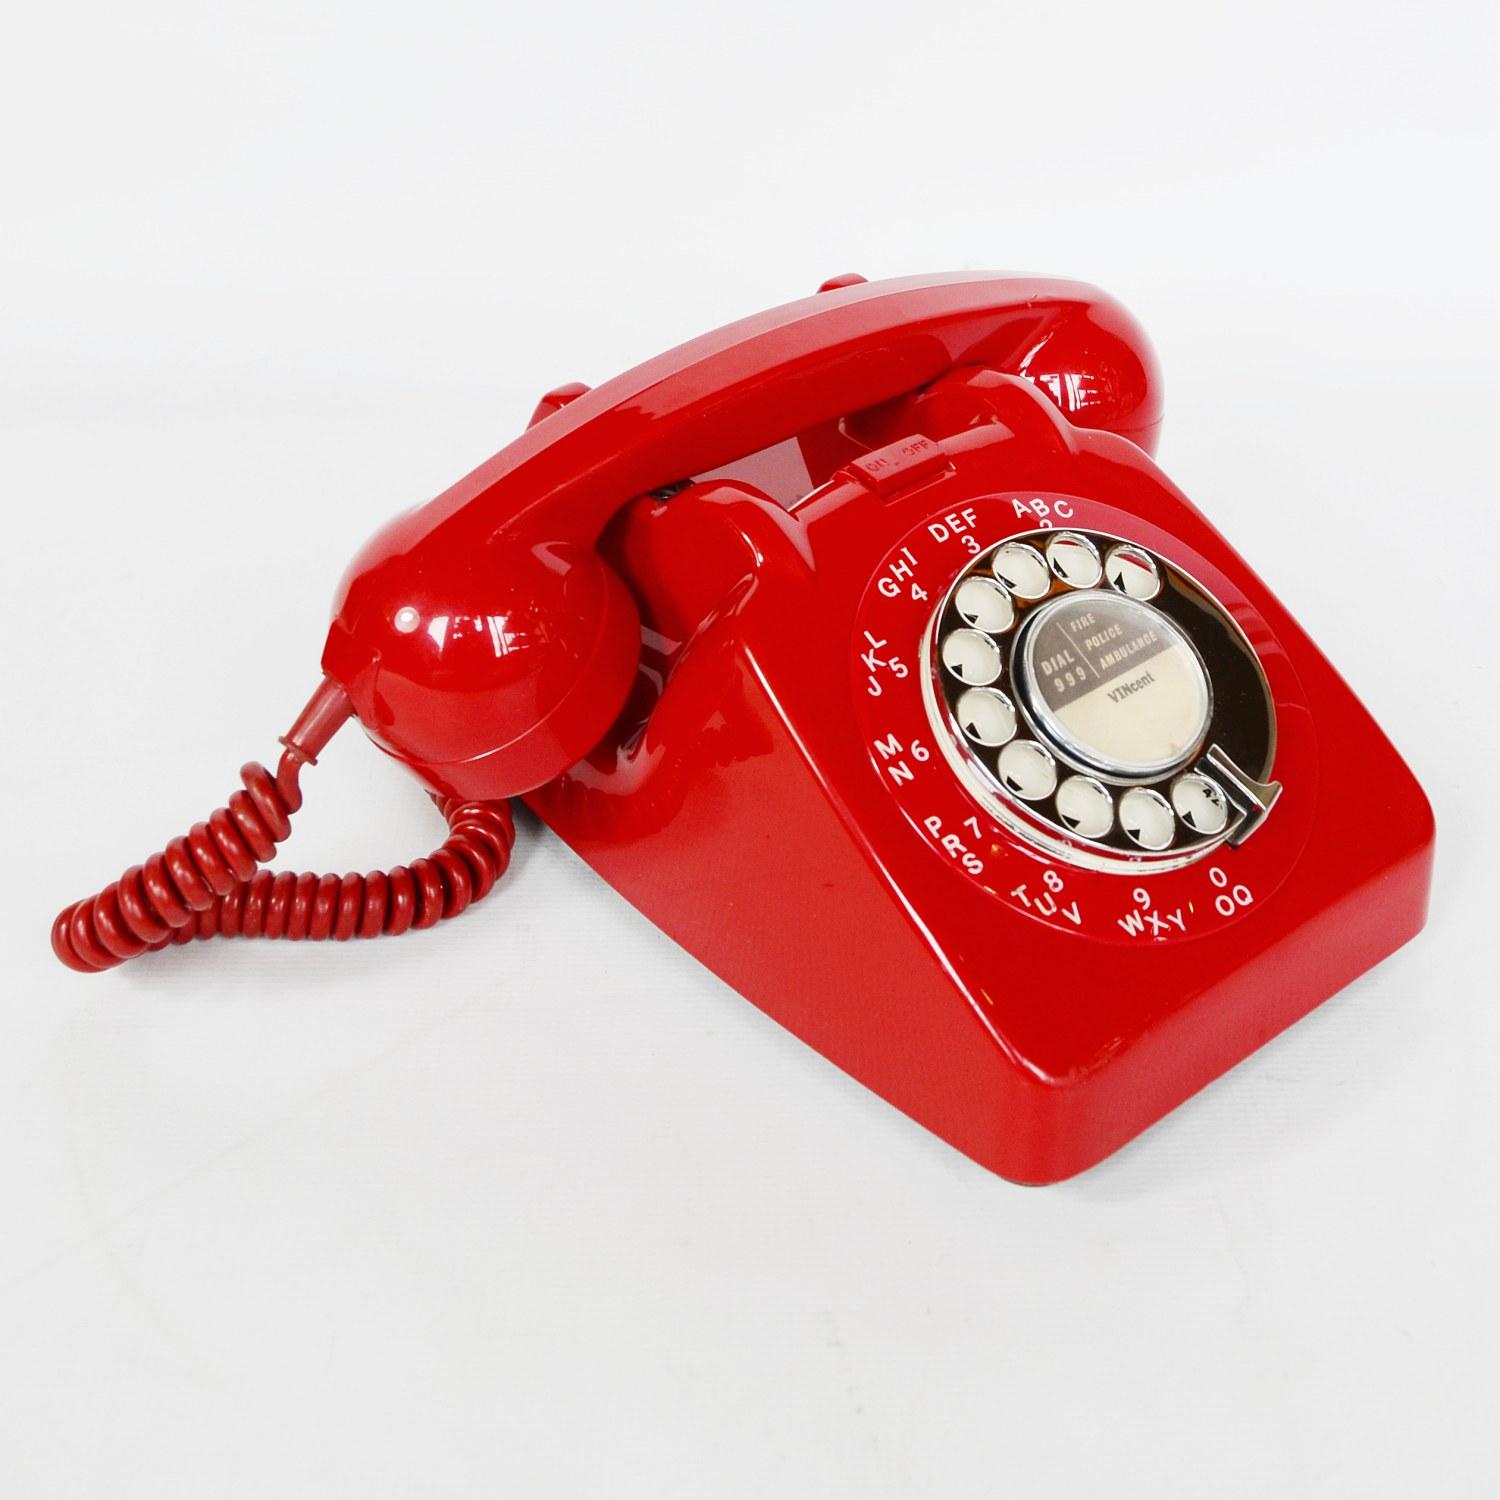 An original red lacquered GPO model 706L telephone. Bell control switch at front.

Dimensions: H 14.5cm, W 10cm, D 22cm

Origin: English

Date: circa 1960

Item No: 1102014

All of our telephones are fully refurbished, re-wired and in full